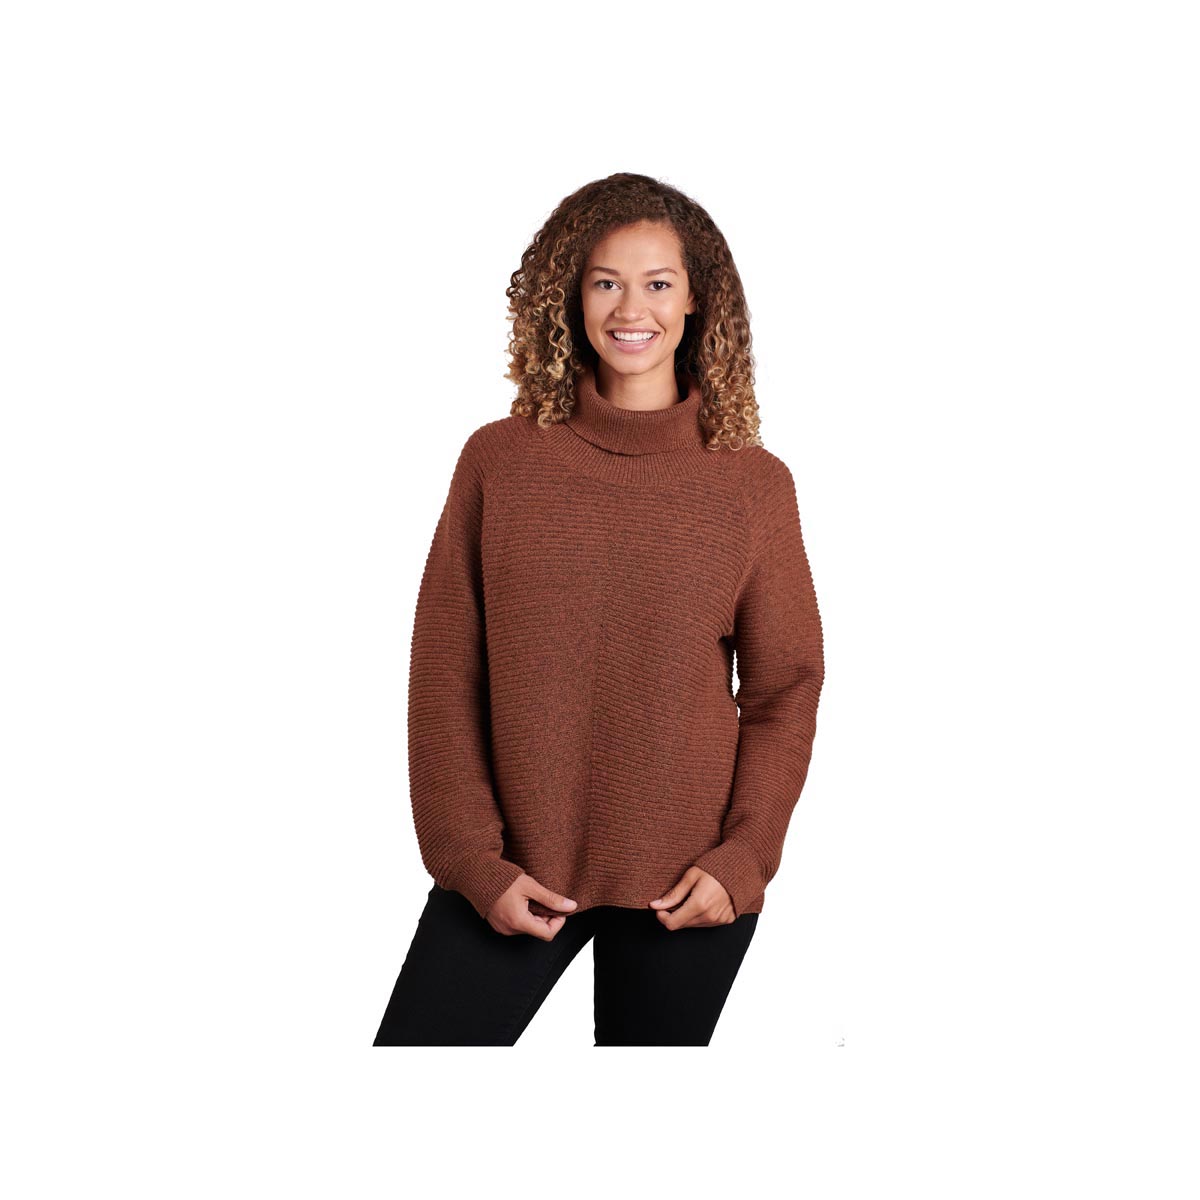 Vamos Outdoors - The KÜHL Sienna Sweater is a perfect fit every time.  Available in Copper, Ash, Big Sky Blue, and Pavement. #kuhl #cozychic  #vamosoutdoors